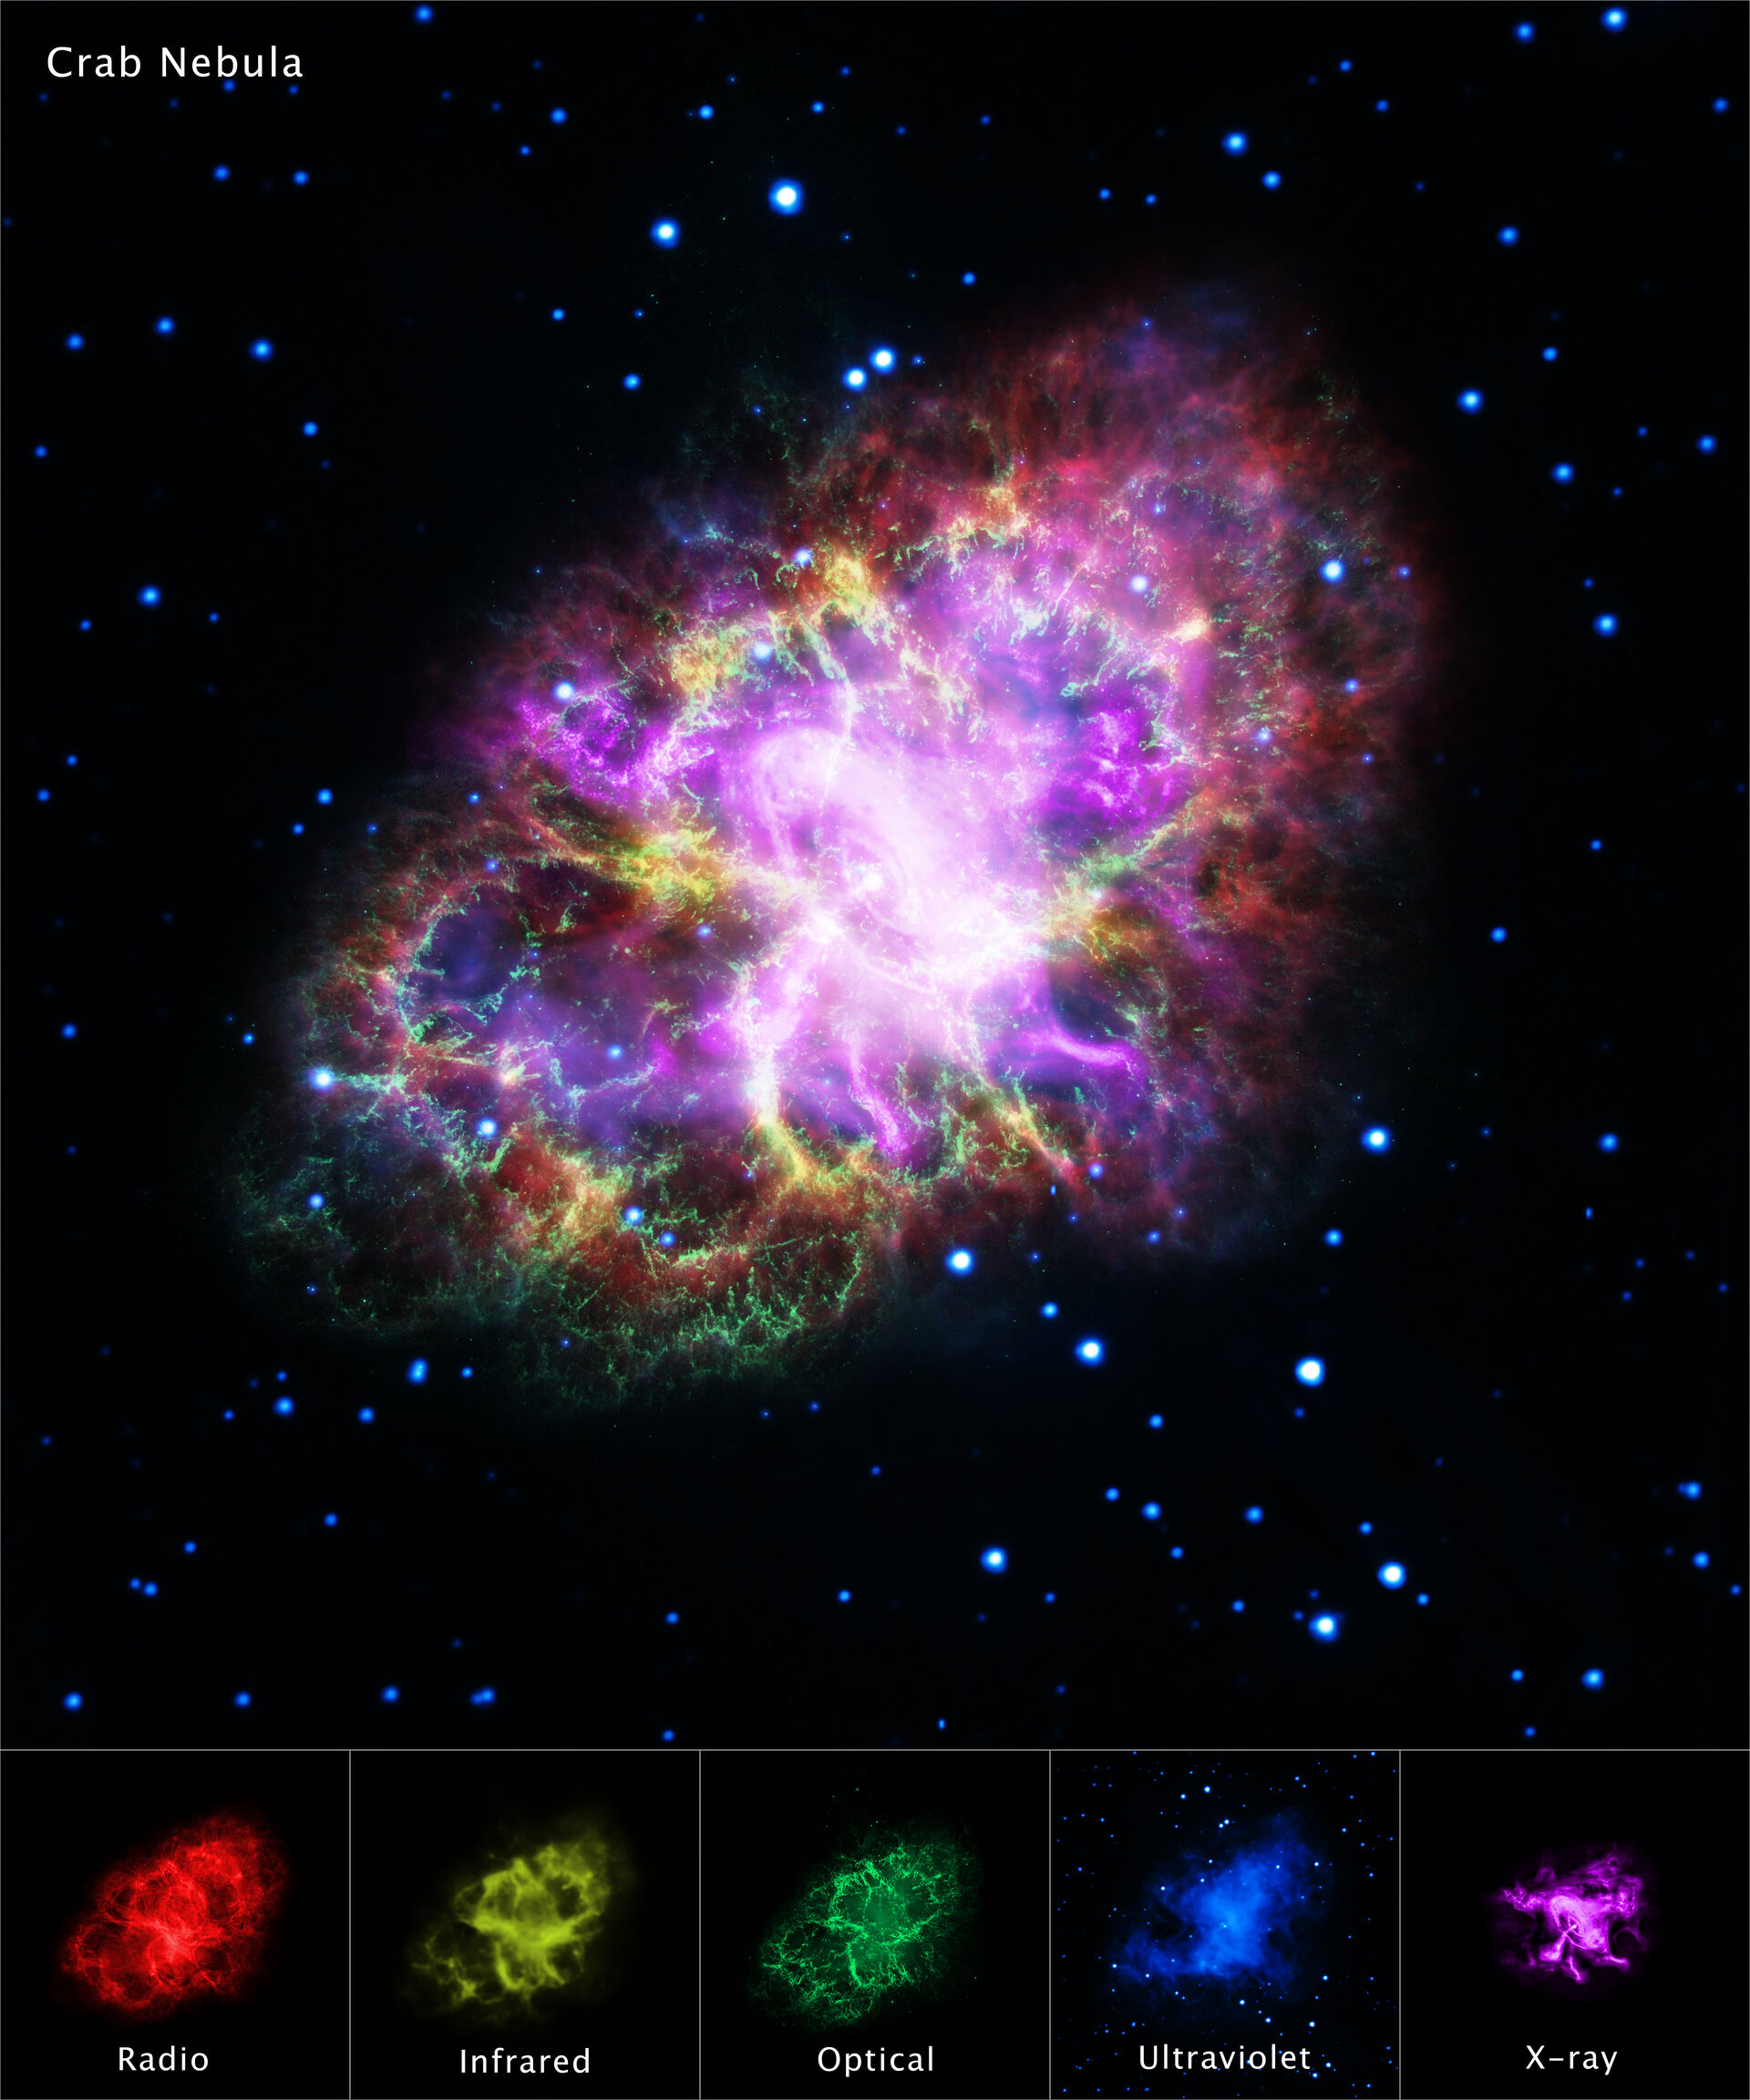 The image contain colourful structure of an astronomical object called Crab Nebula on a black background.